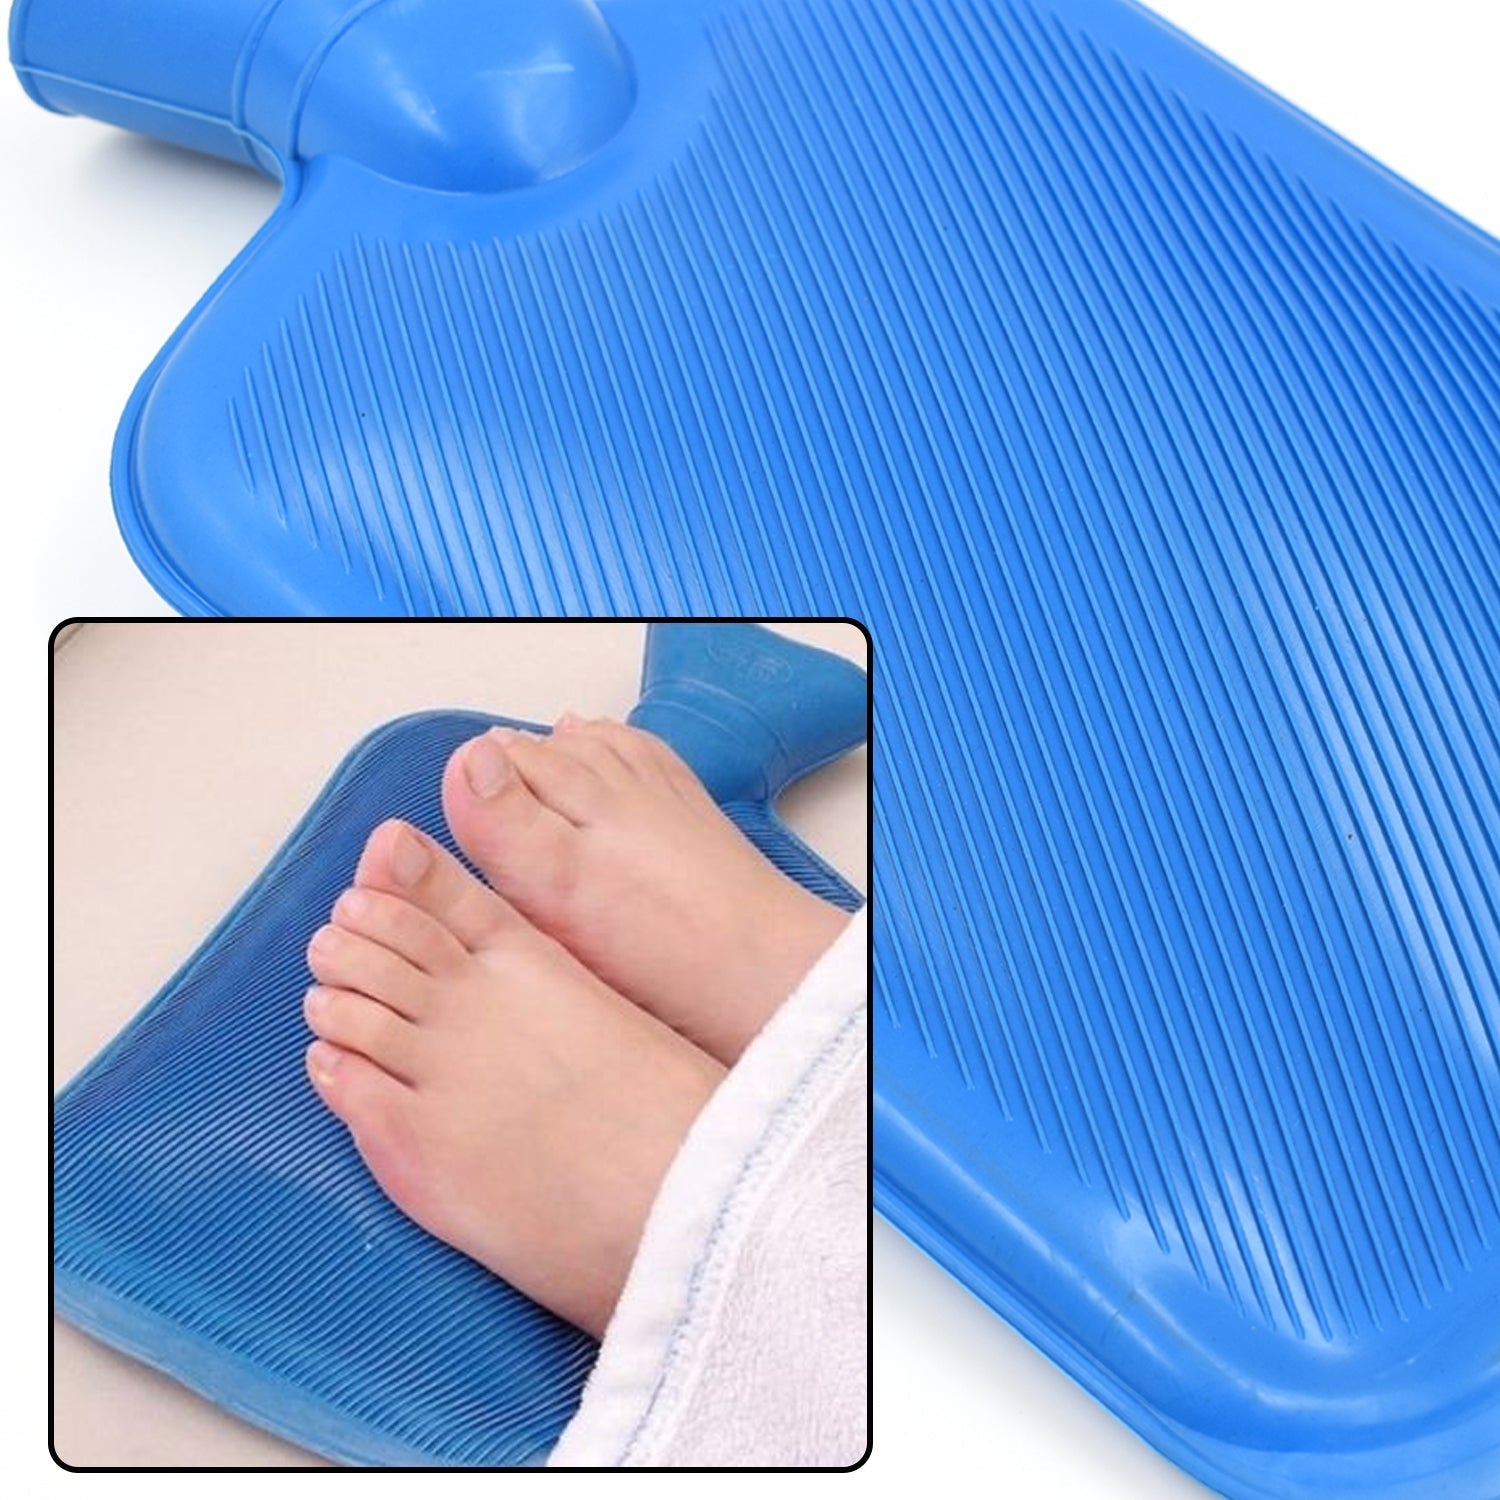 1454 Hot water Bag 2000 ML used in all kinds of household and medical purposes as a pain relief from muscle and neural problems. DeoDap